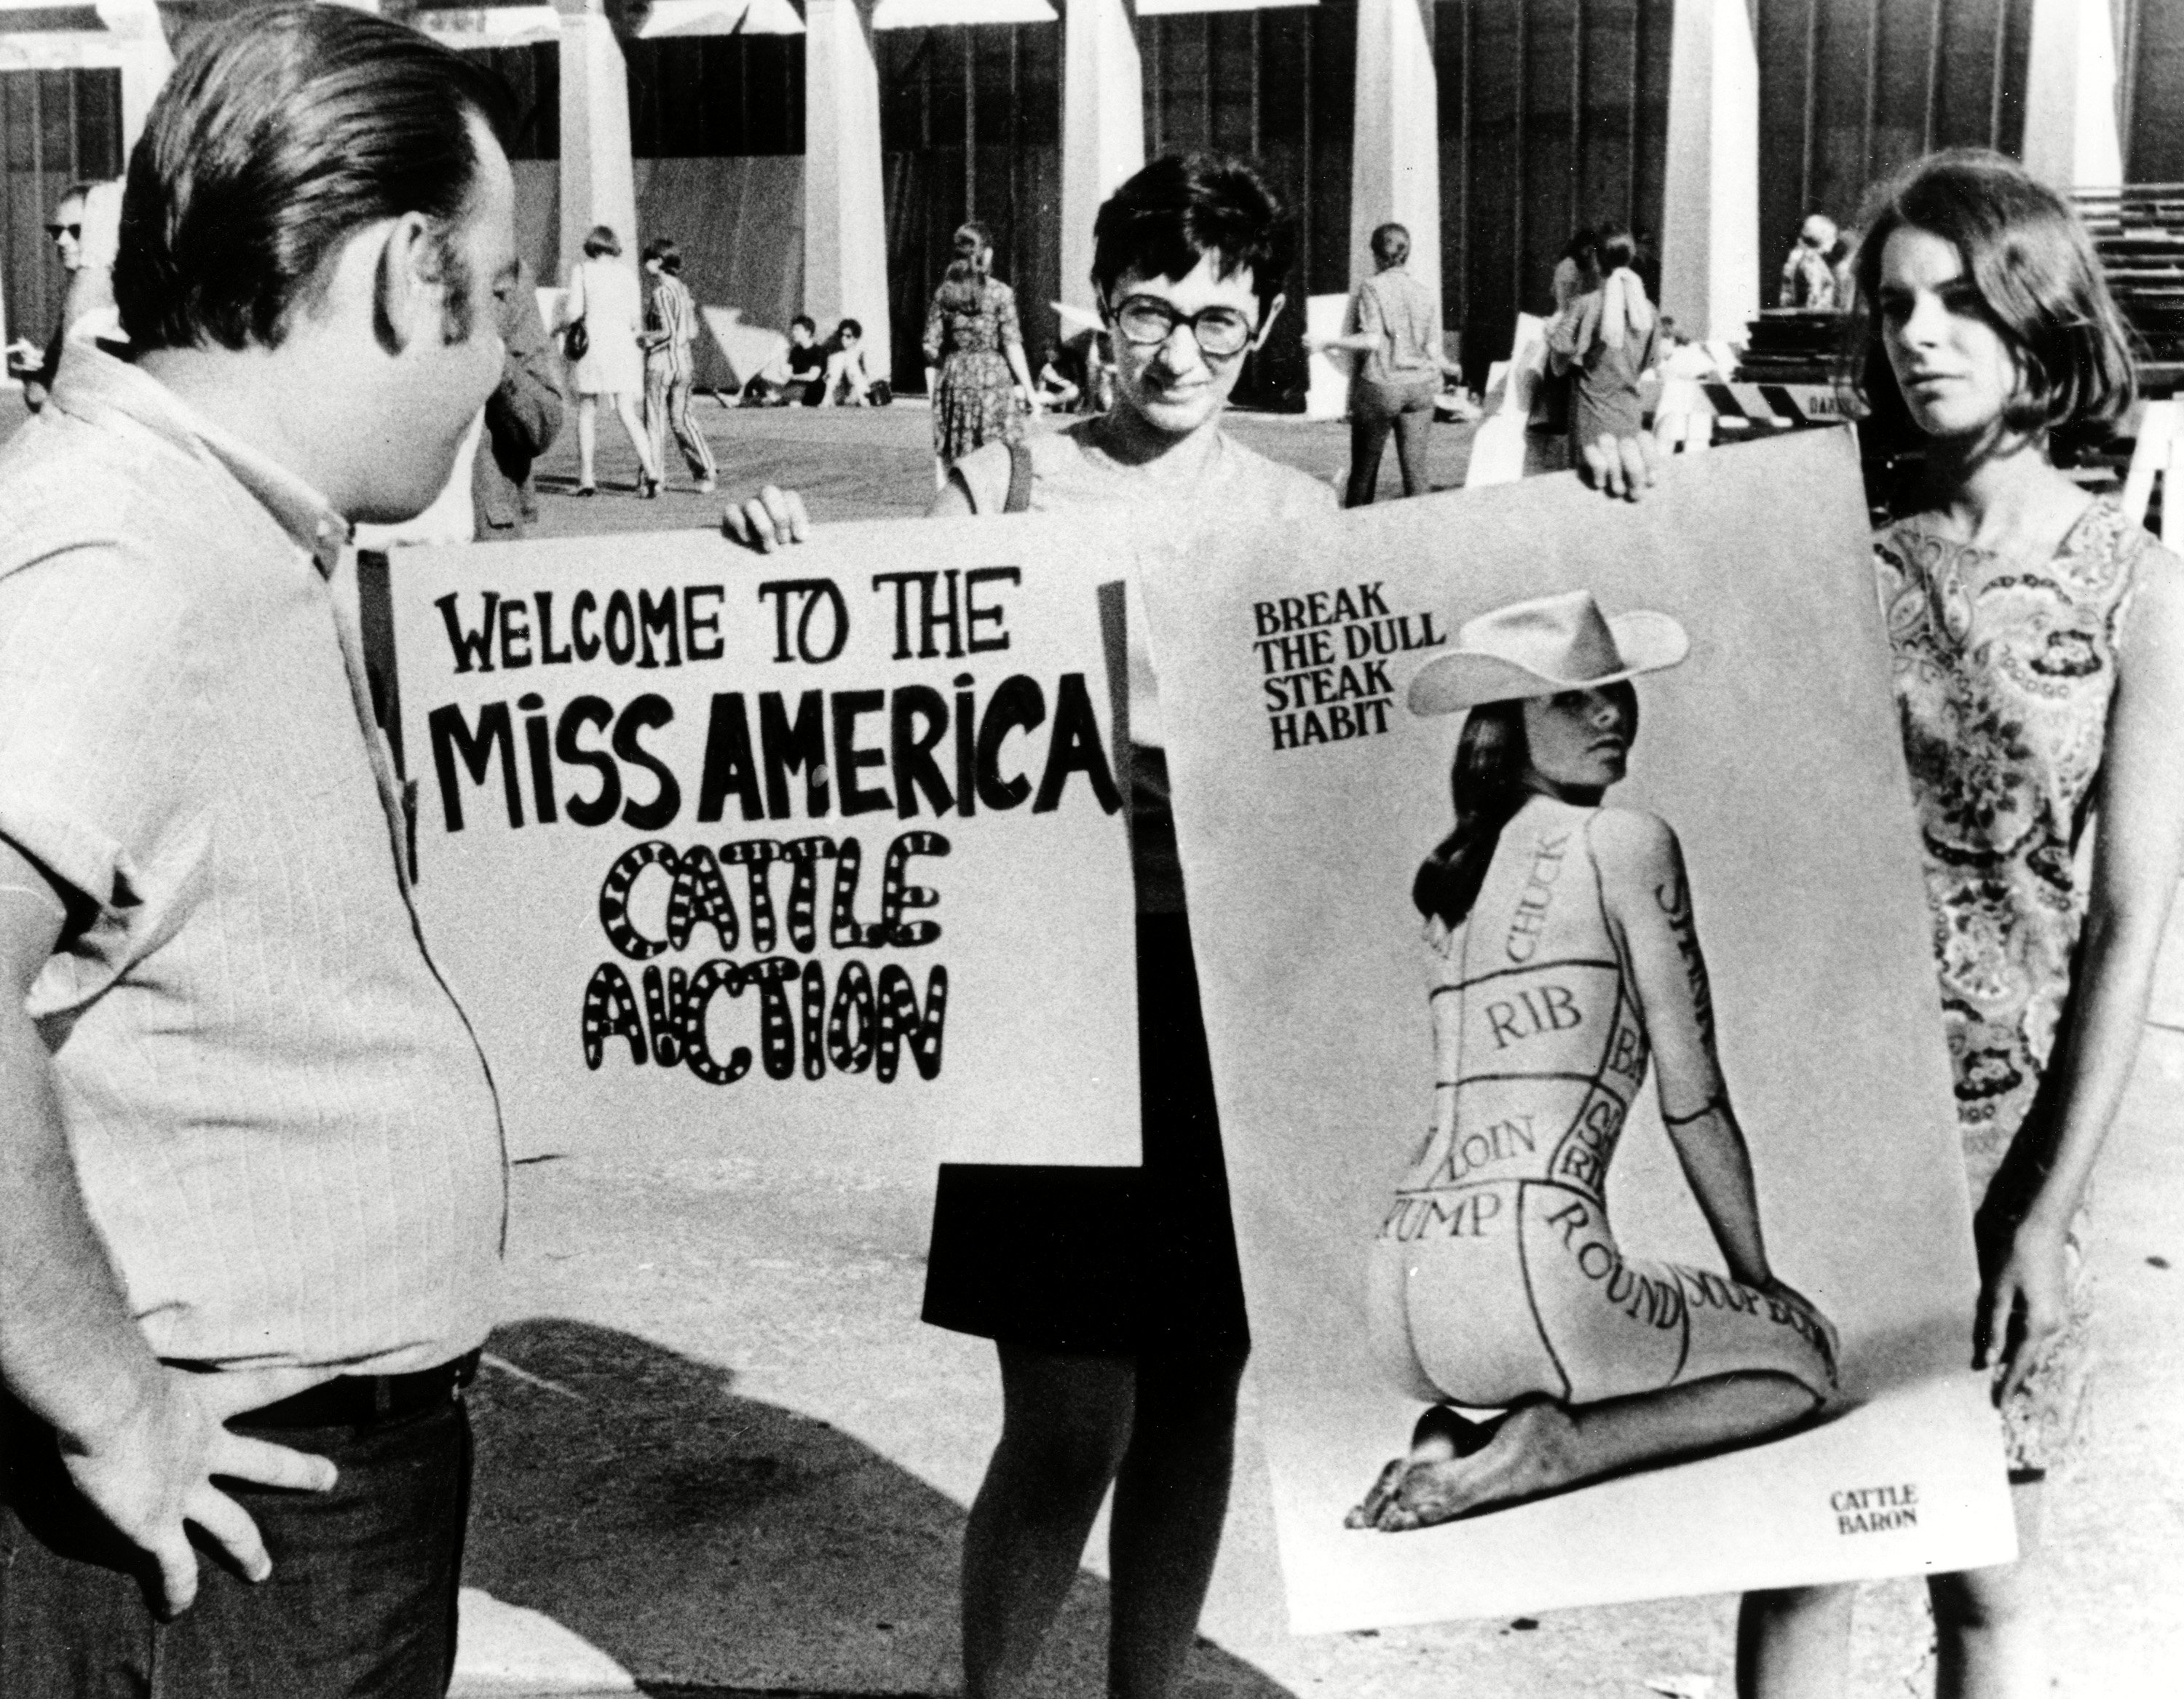 Protesters denounce the swimsuit competition as a cattle auction on the boardwalk in Atlantic City, N.J., where the Miss America Pageant is taking place on Sep. 7, 1968. (Shutterstock)